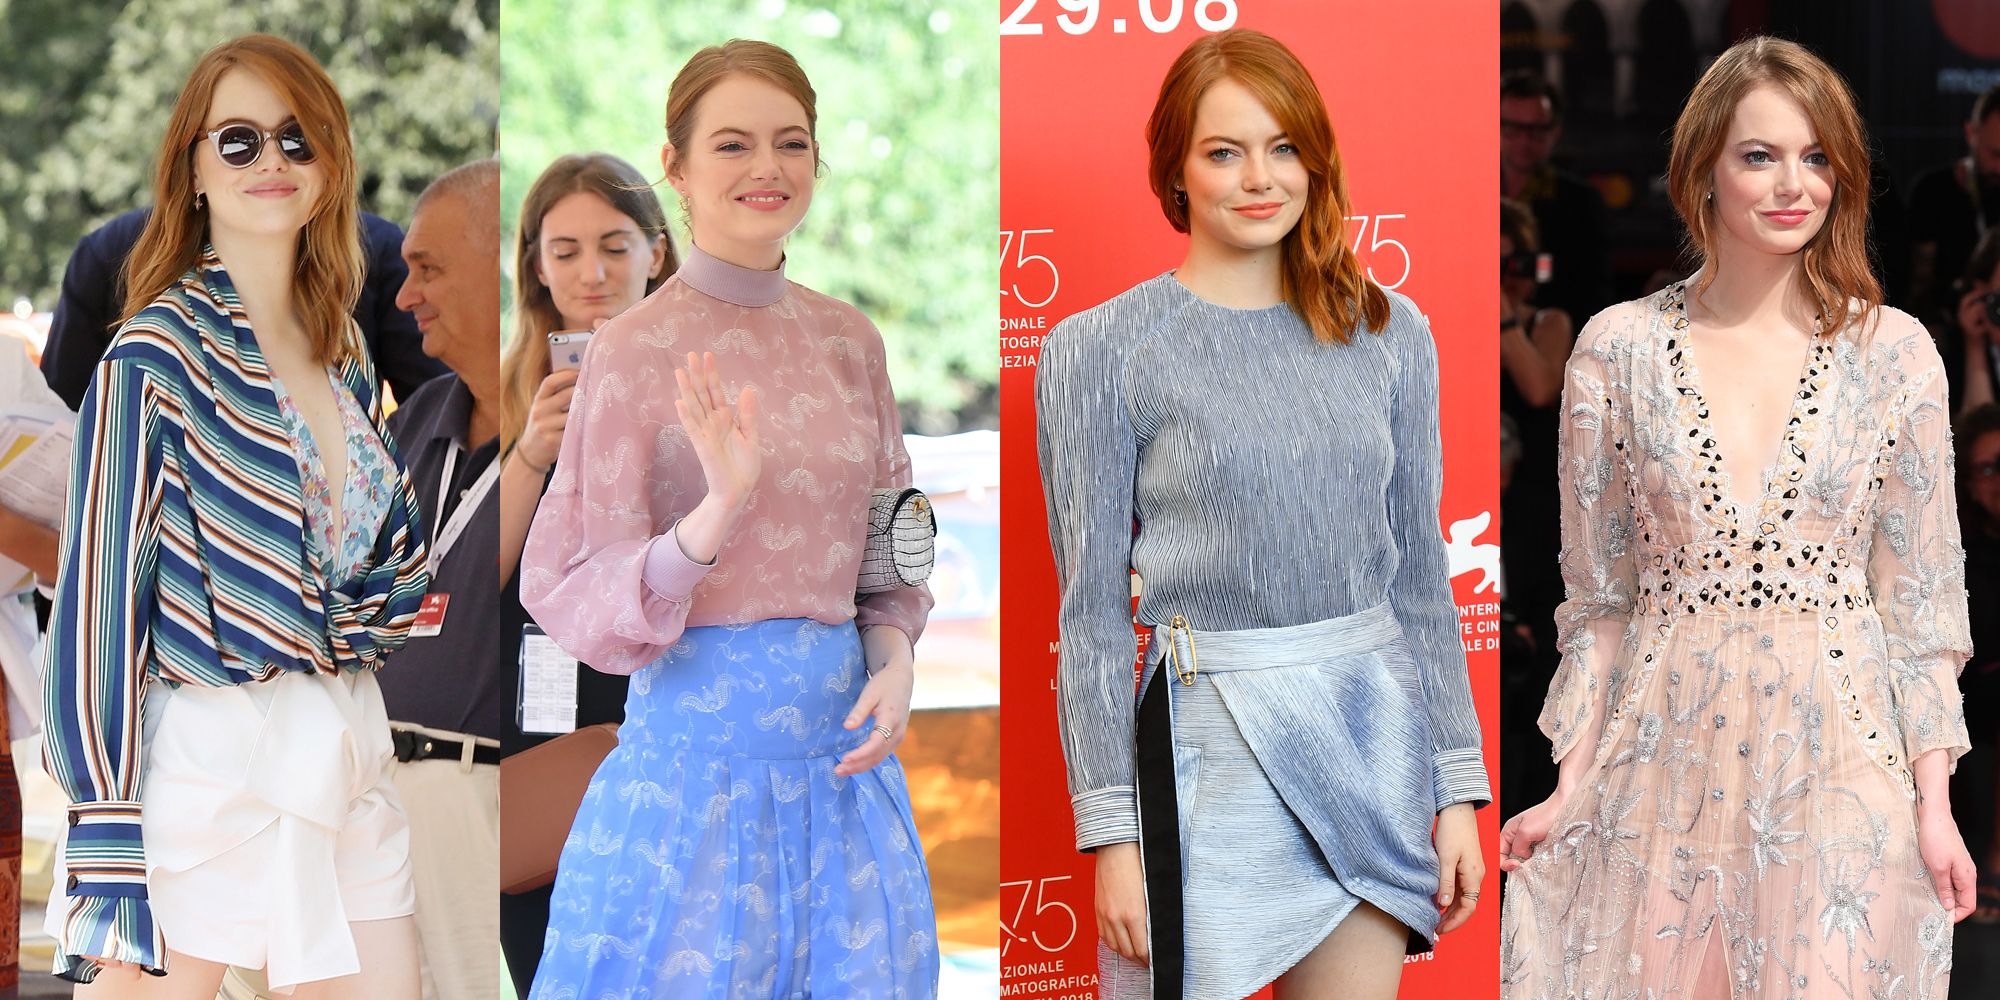 Get Emma Stone's menswear-inspired look this weekend - Chatelaine